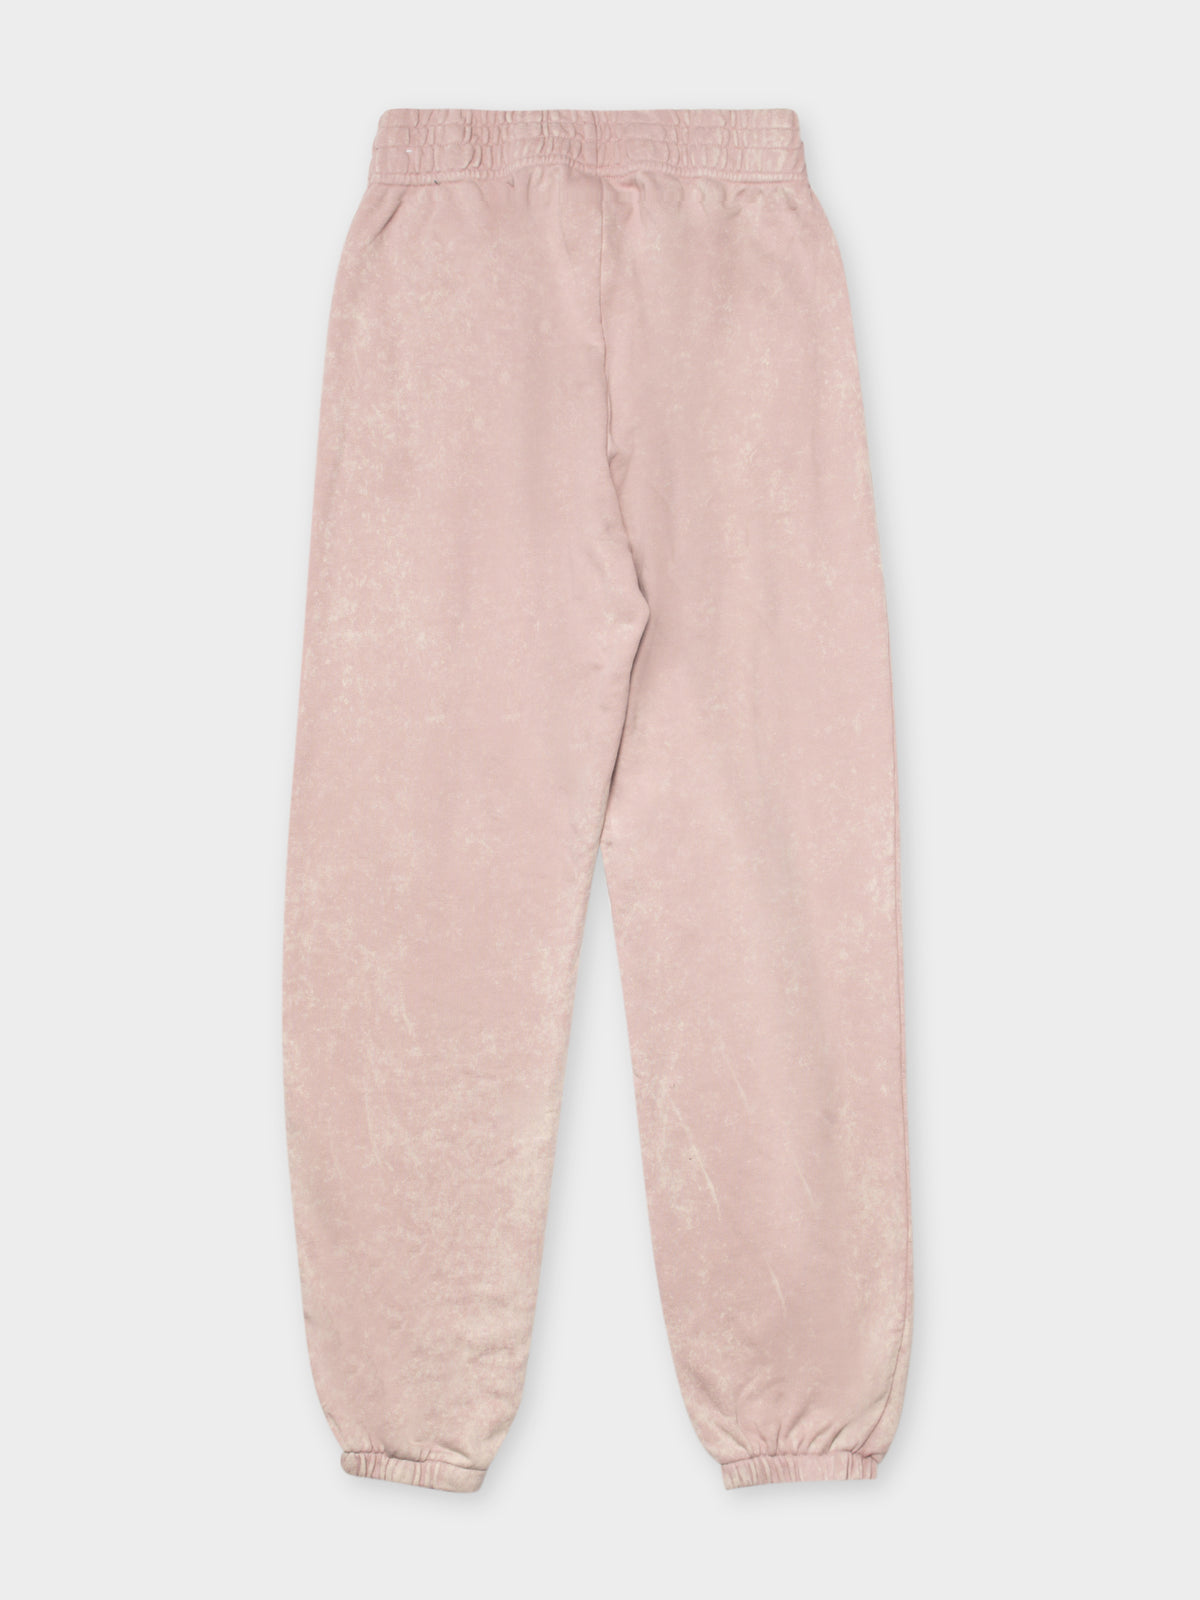 NSW Essential Fleece Track Pants in Champagne